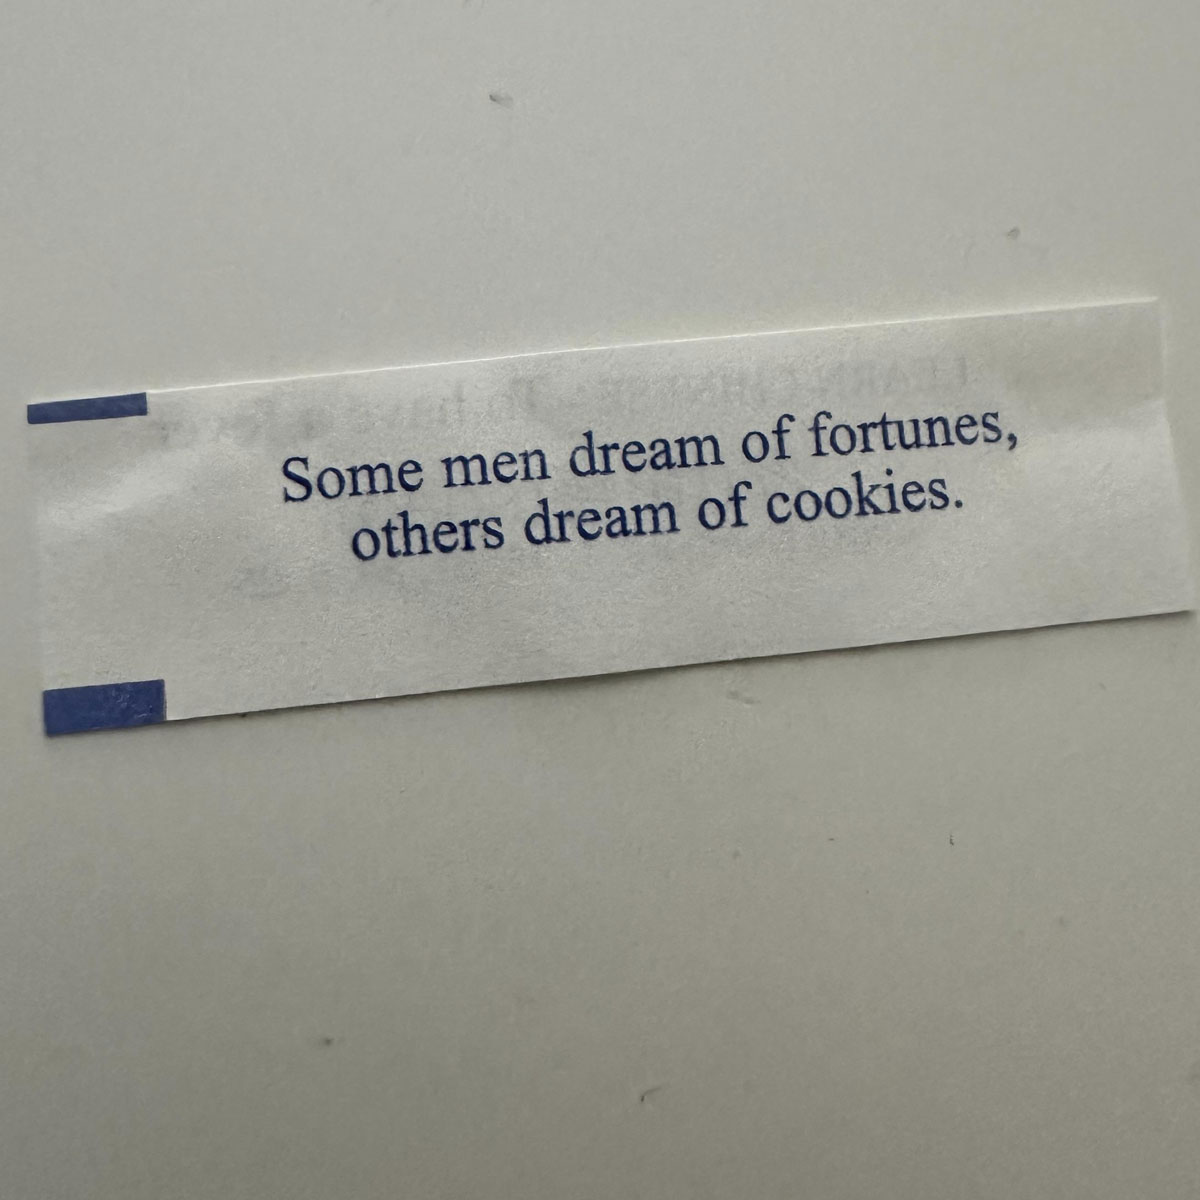 The fortune I received today